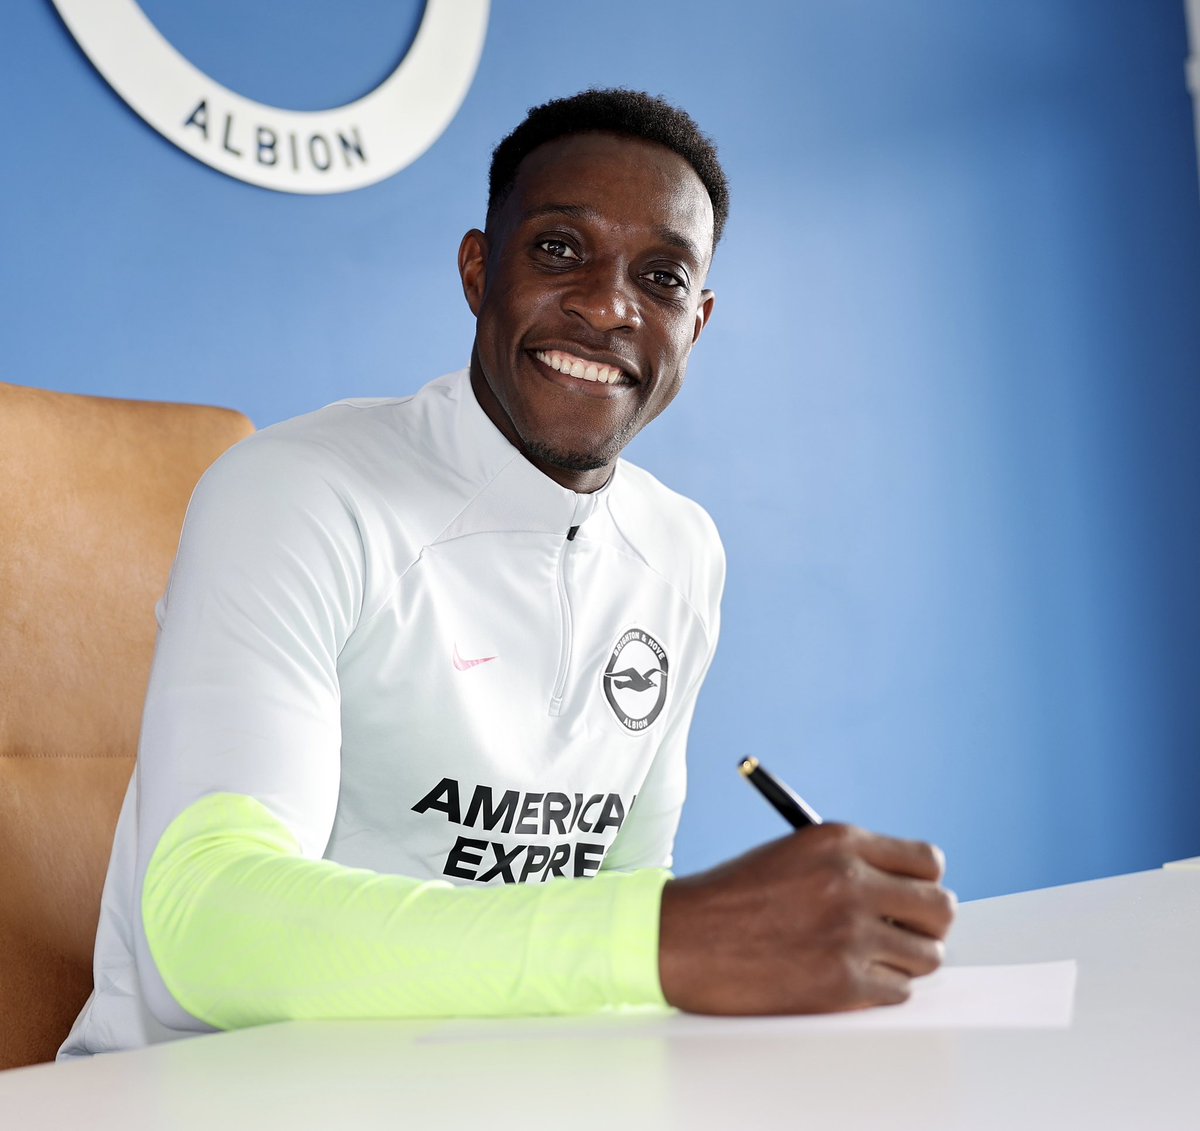 Happy to have signed for another 2 years at @OfficialBHAFC! Looking forward to making more memories with the Seagulls! 💙🤍 #BHAFC